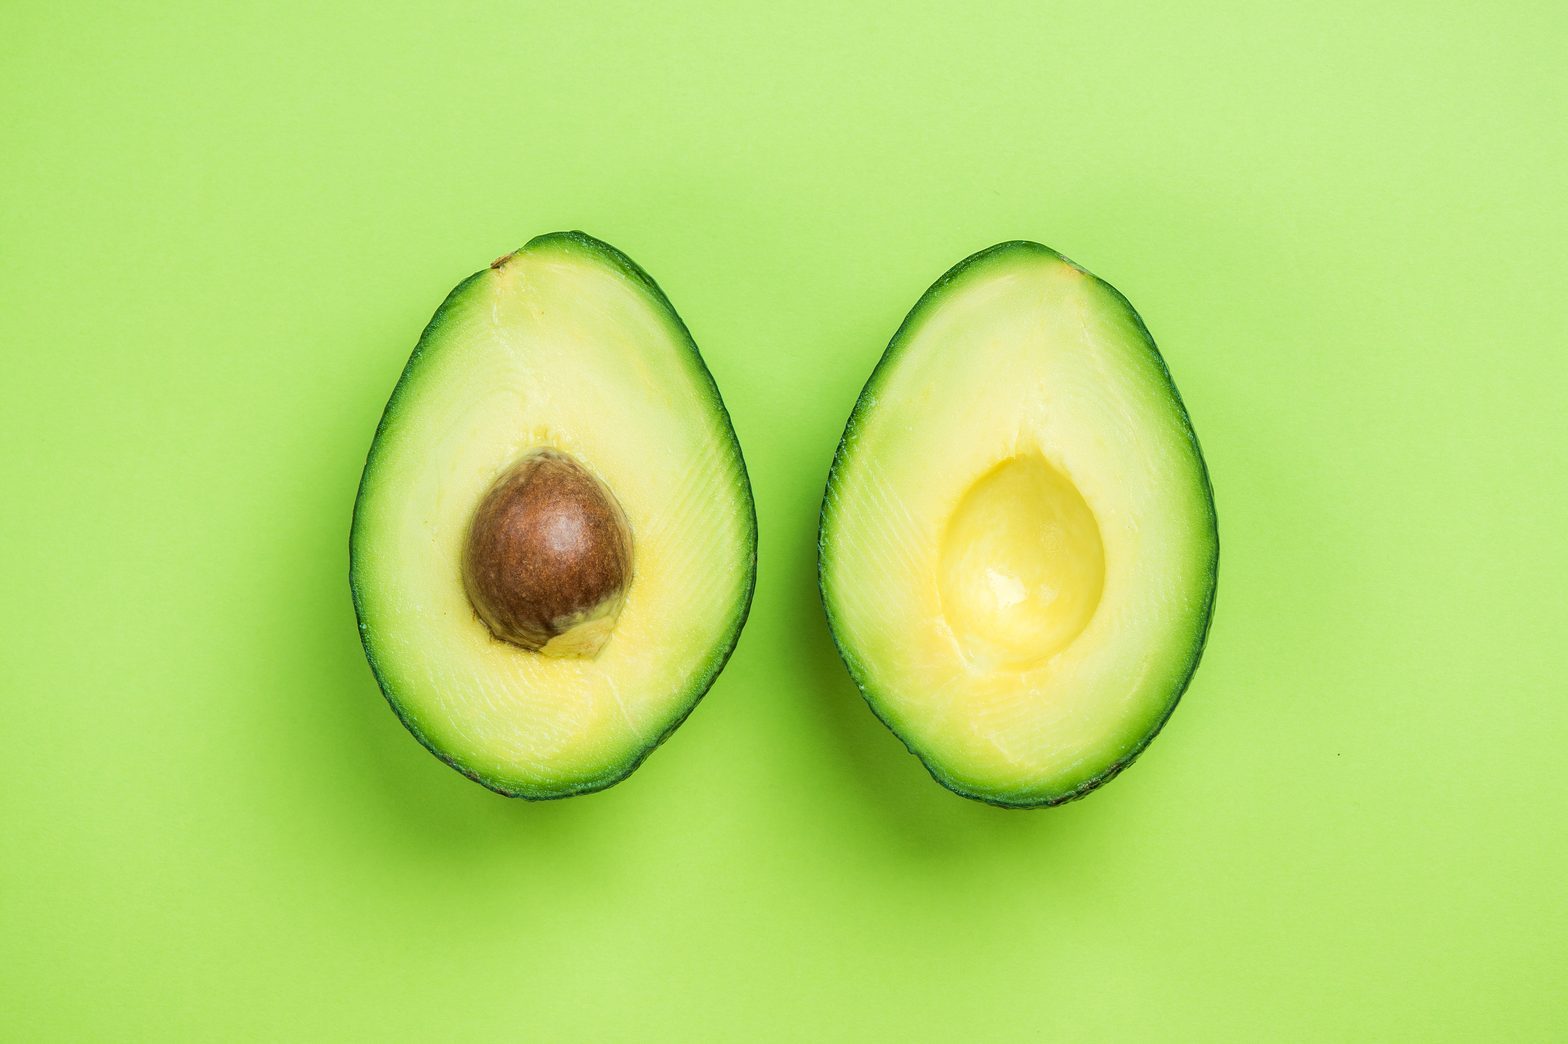 Is Avocado a Fruit or a Vegetable? — Facts About Avocados